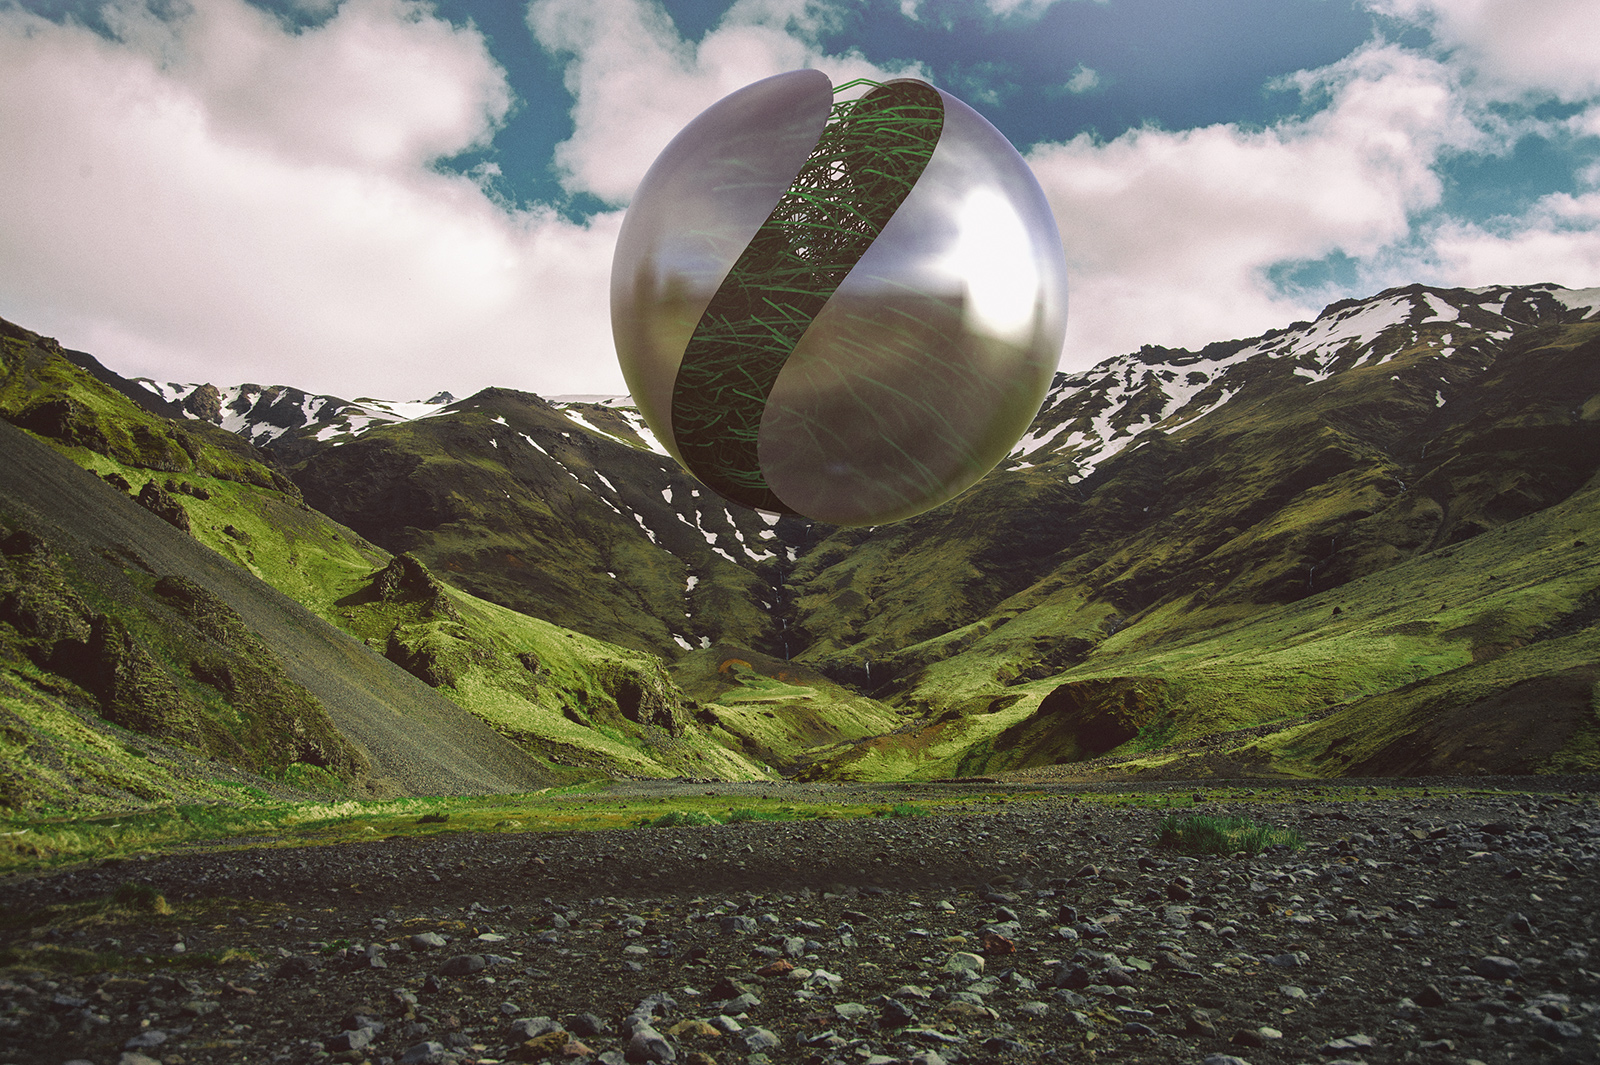 Seljavallalaug, South Iceland, Tale of Two Worlds, Surreal, Iceland Exploration, Iceland, Lost in Iceland, Cinema 4D, C4D, 3D Render, Daily Render, CGI, Scifi, landscape, Nikon D700, 52 Renders